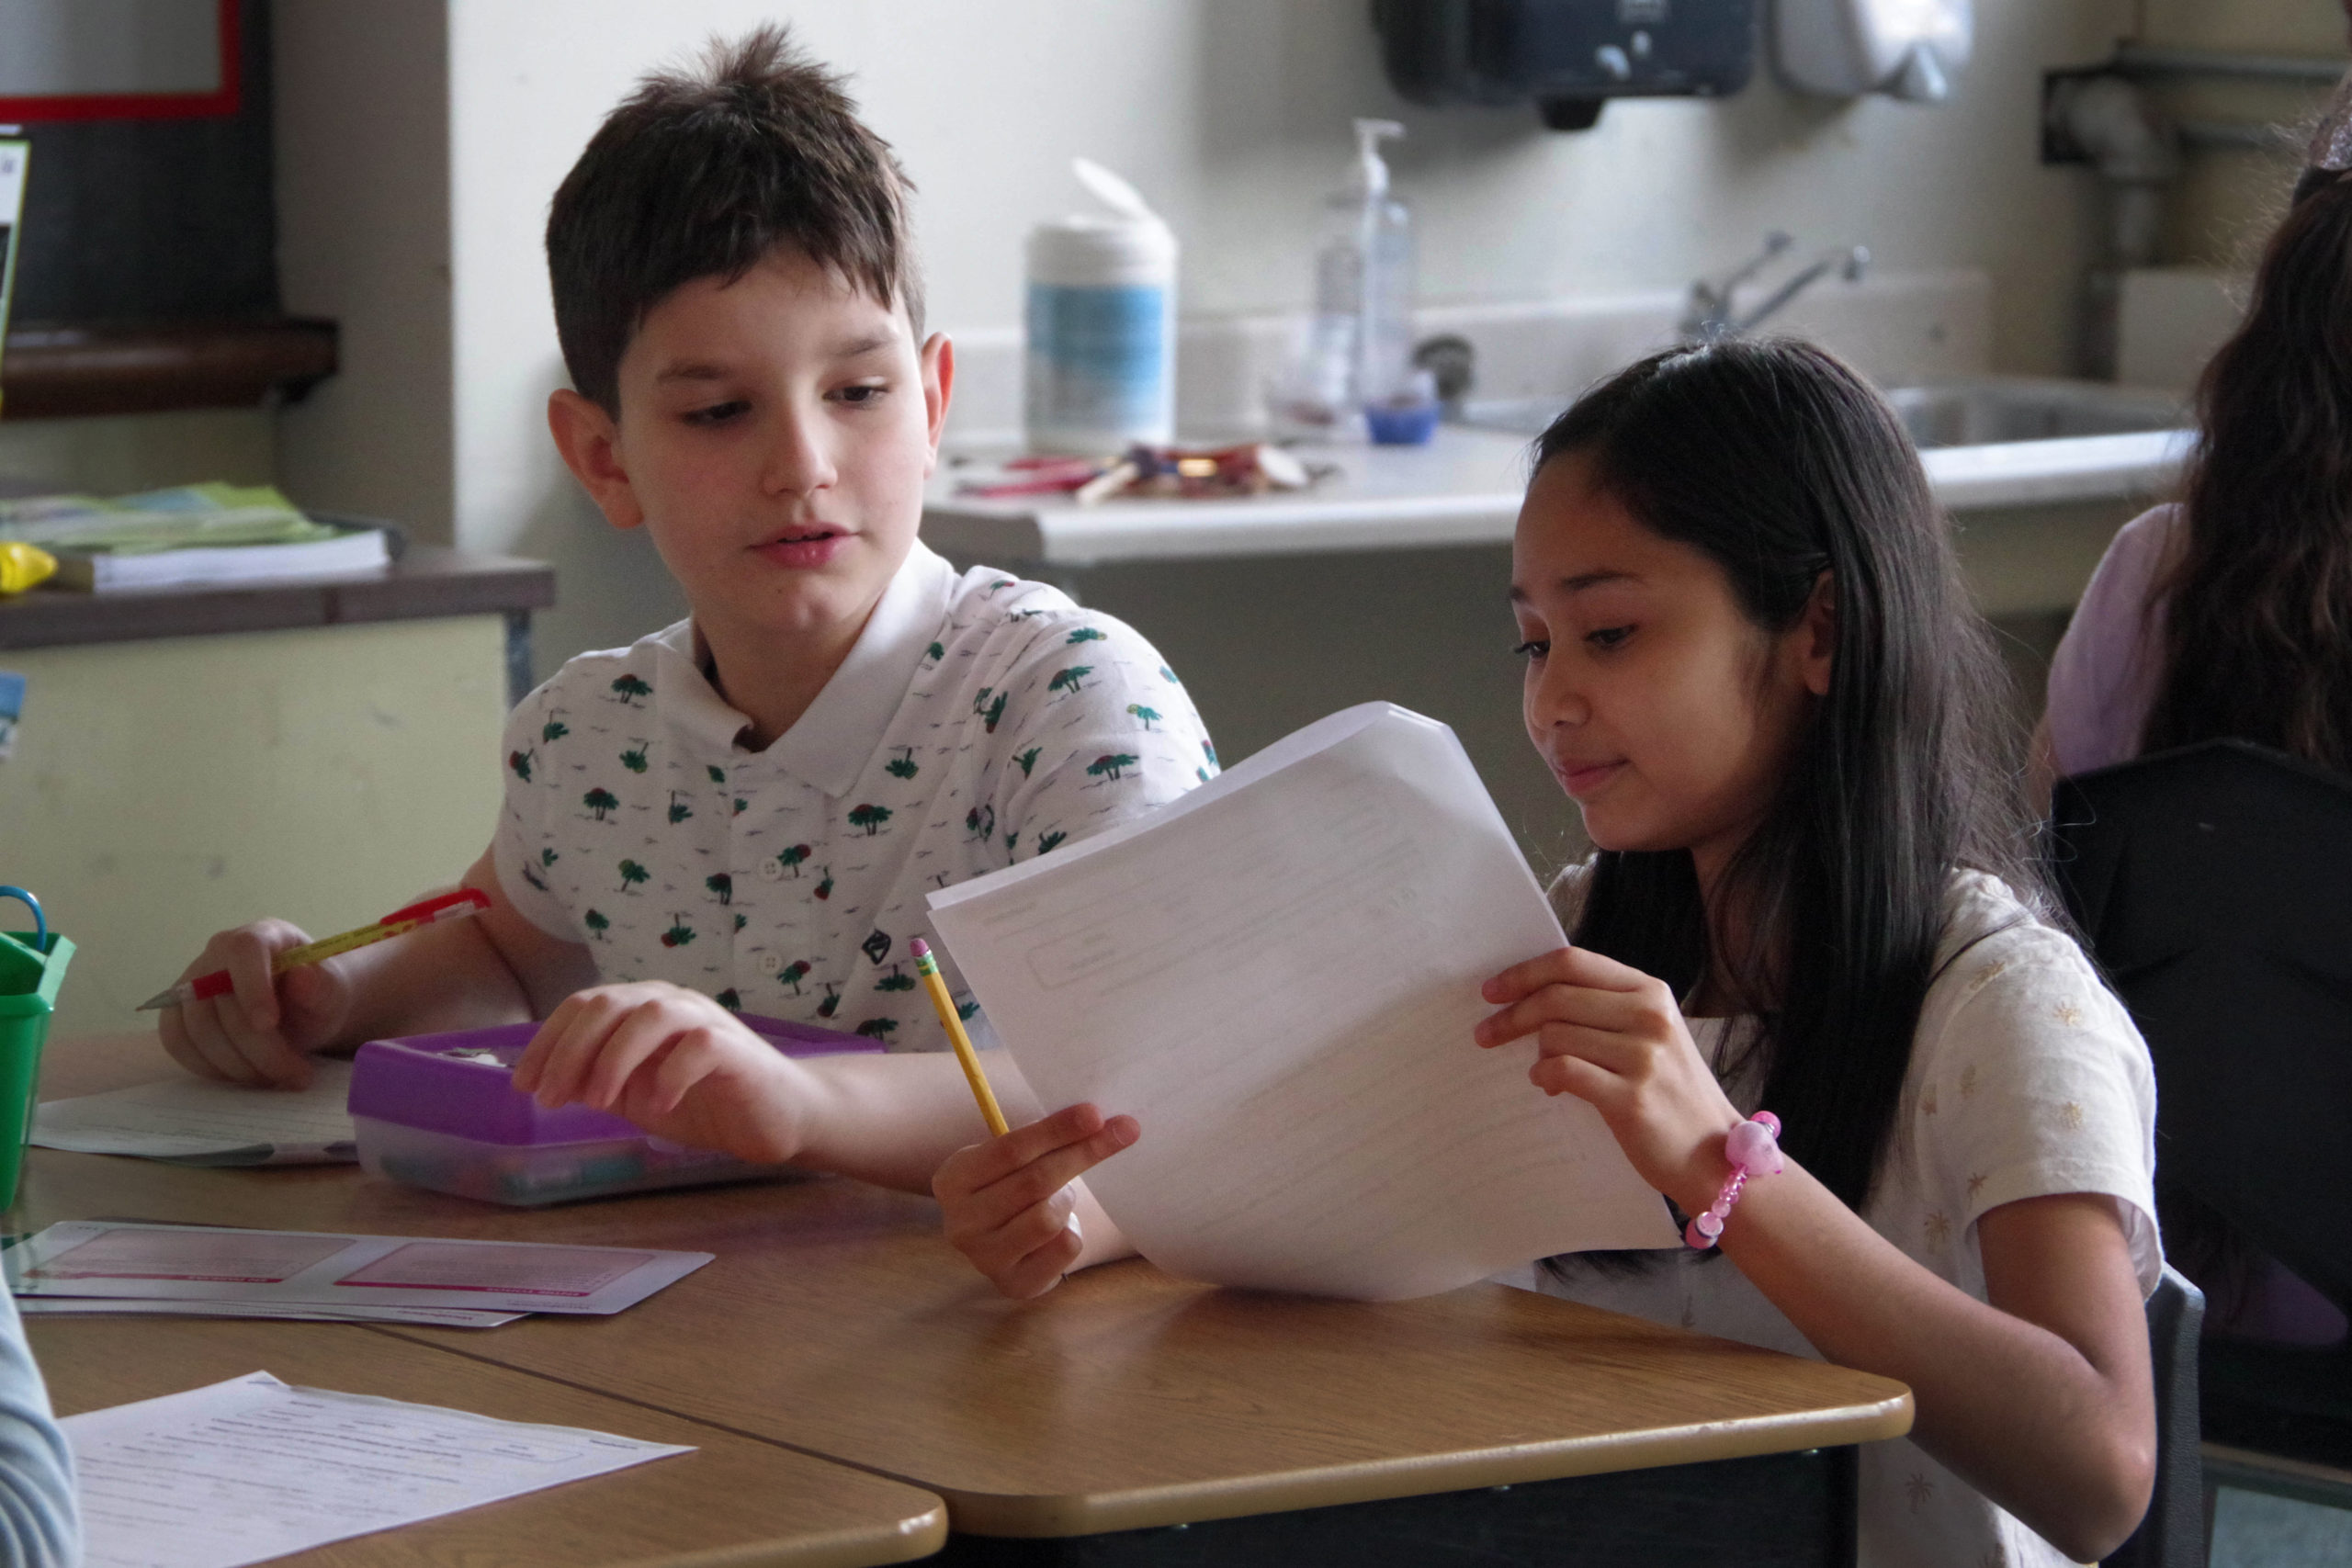 Joseph Metcalf and E.N. White elementaries are breaking down language barriers in education by adding a new grade level to their dual-language programs every year.